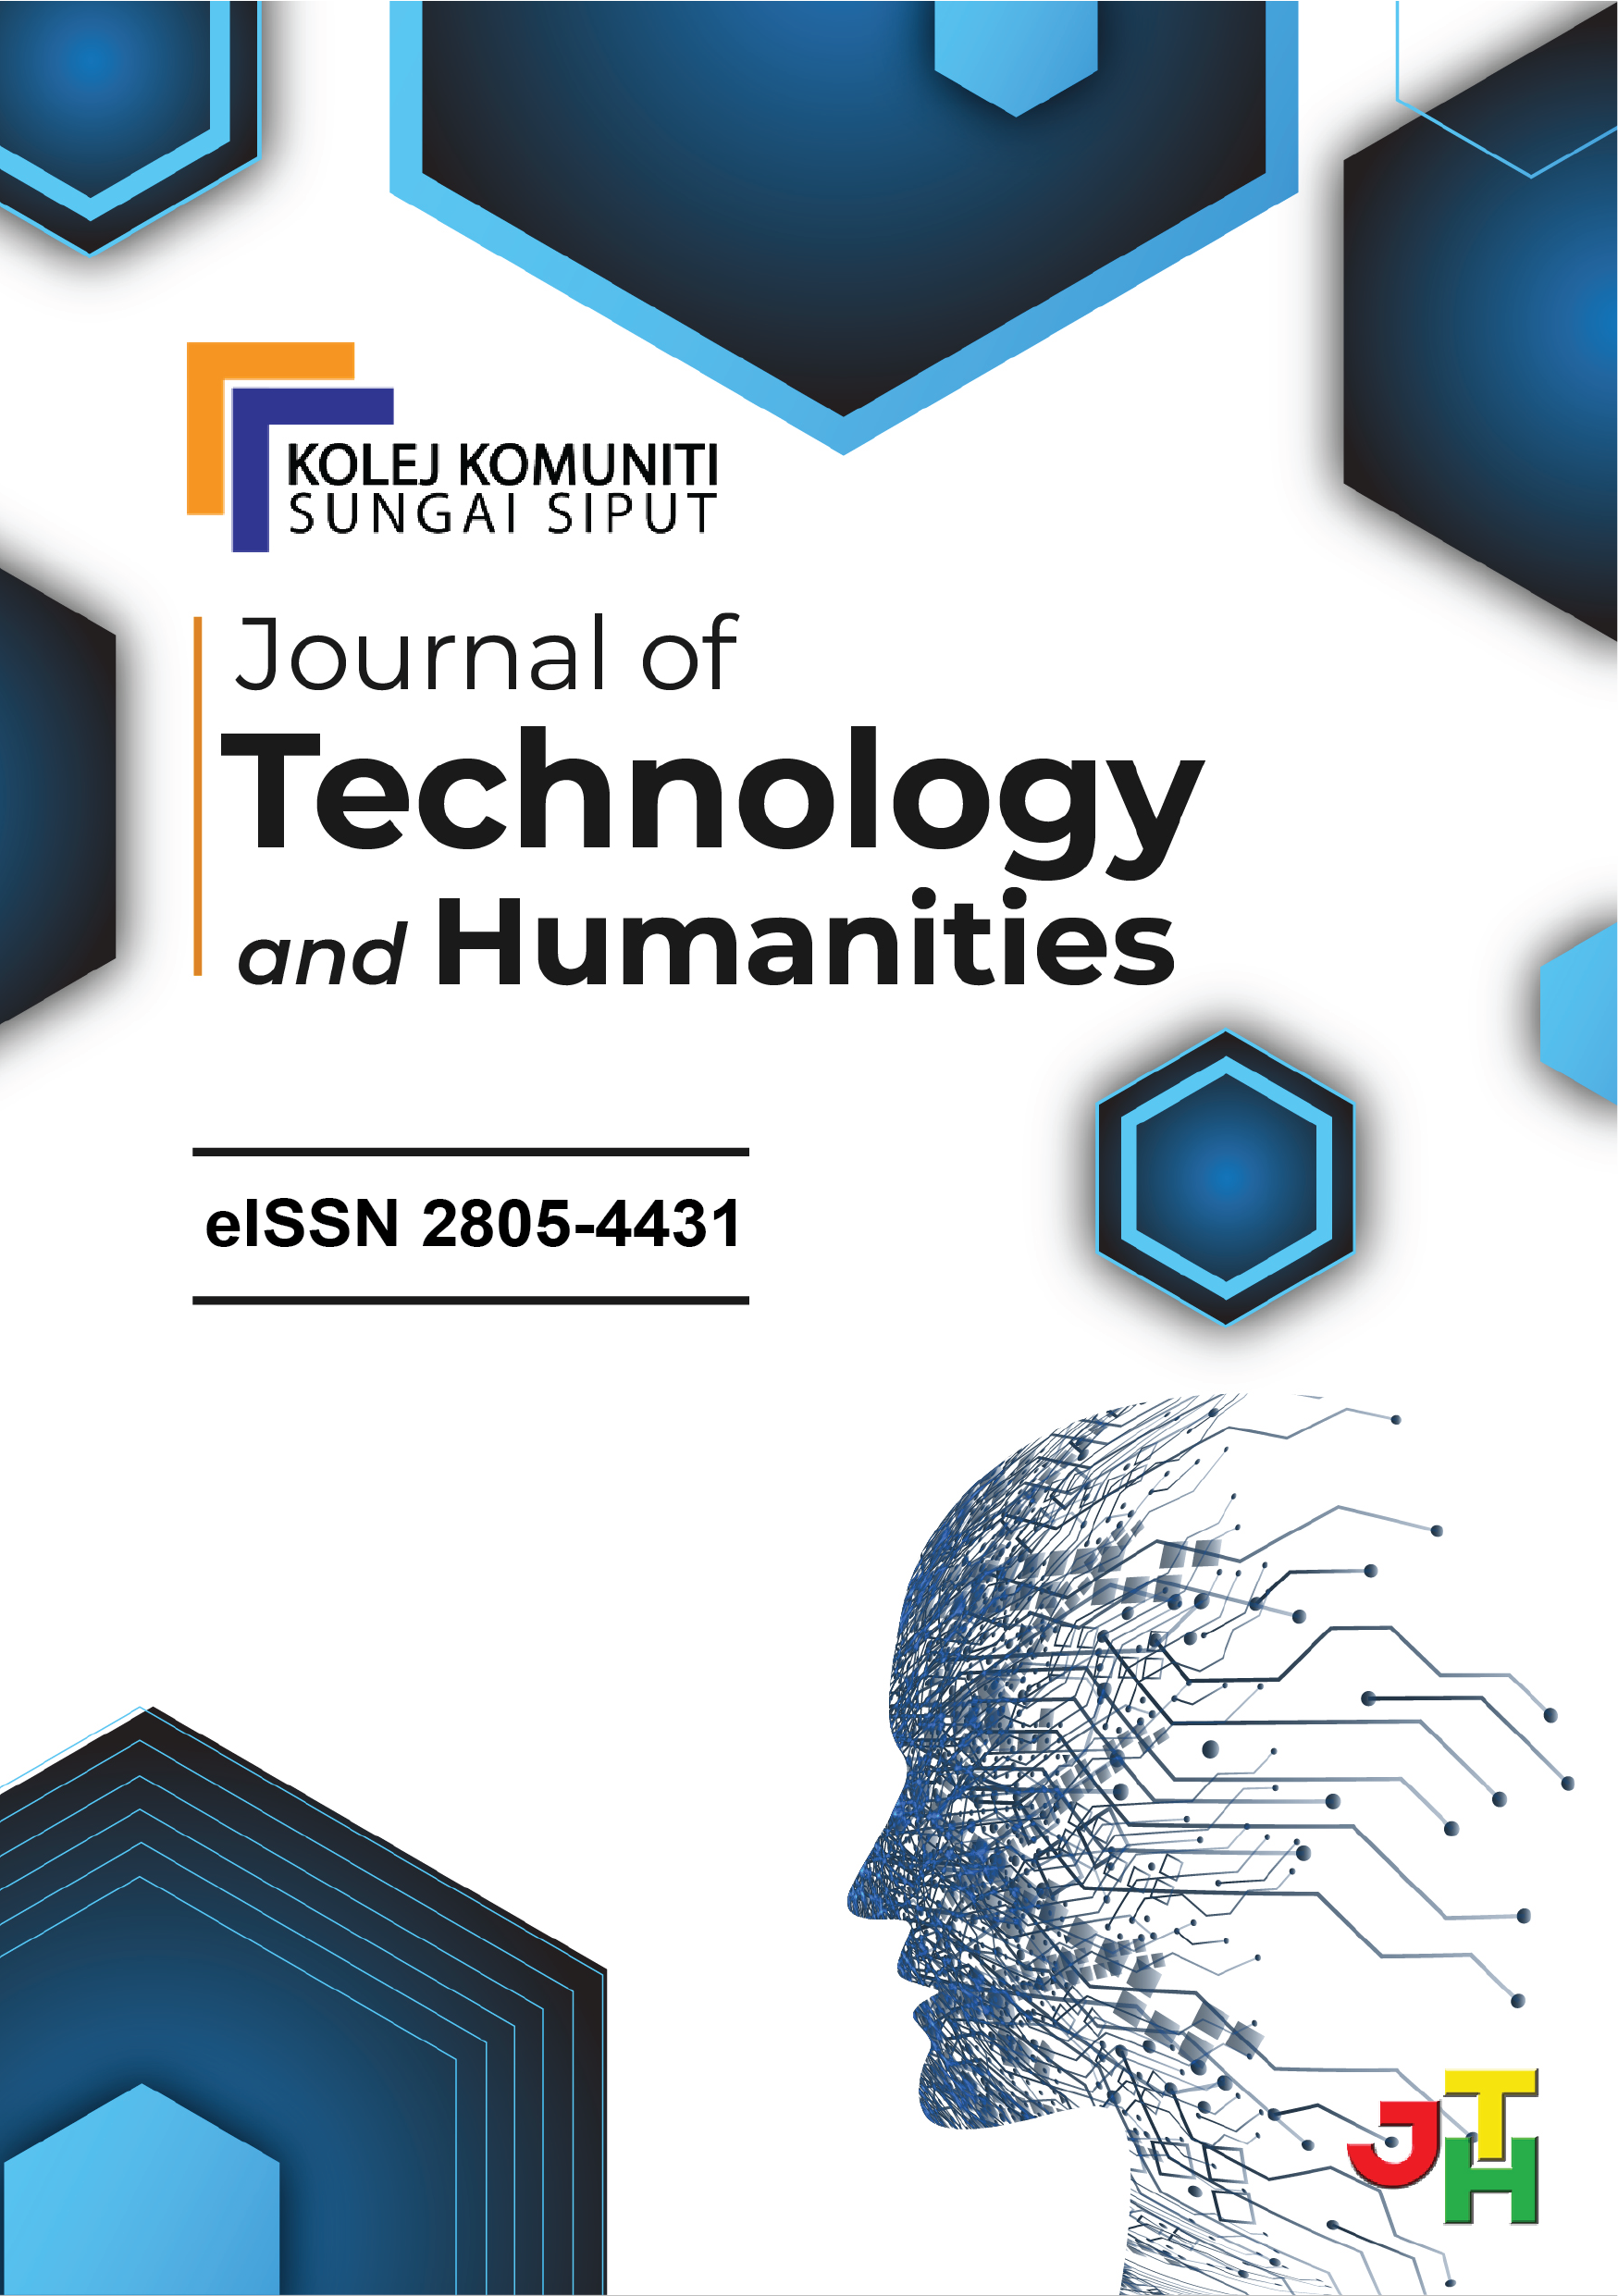 					View Vol. 2 No. 1 (2021): Journal of Technology and Humanities
				